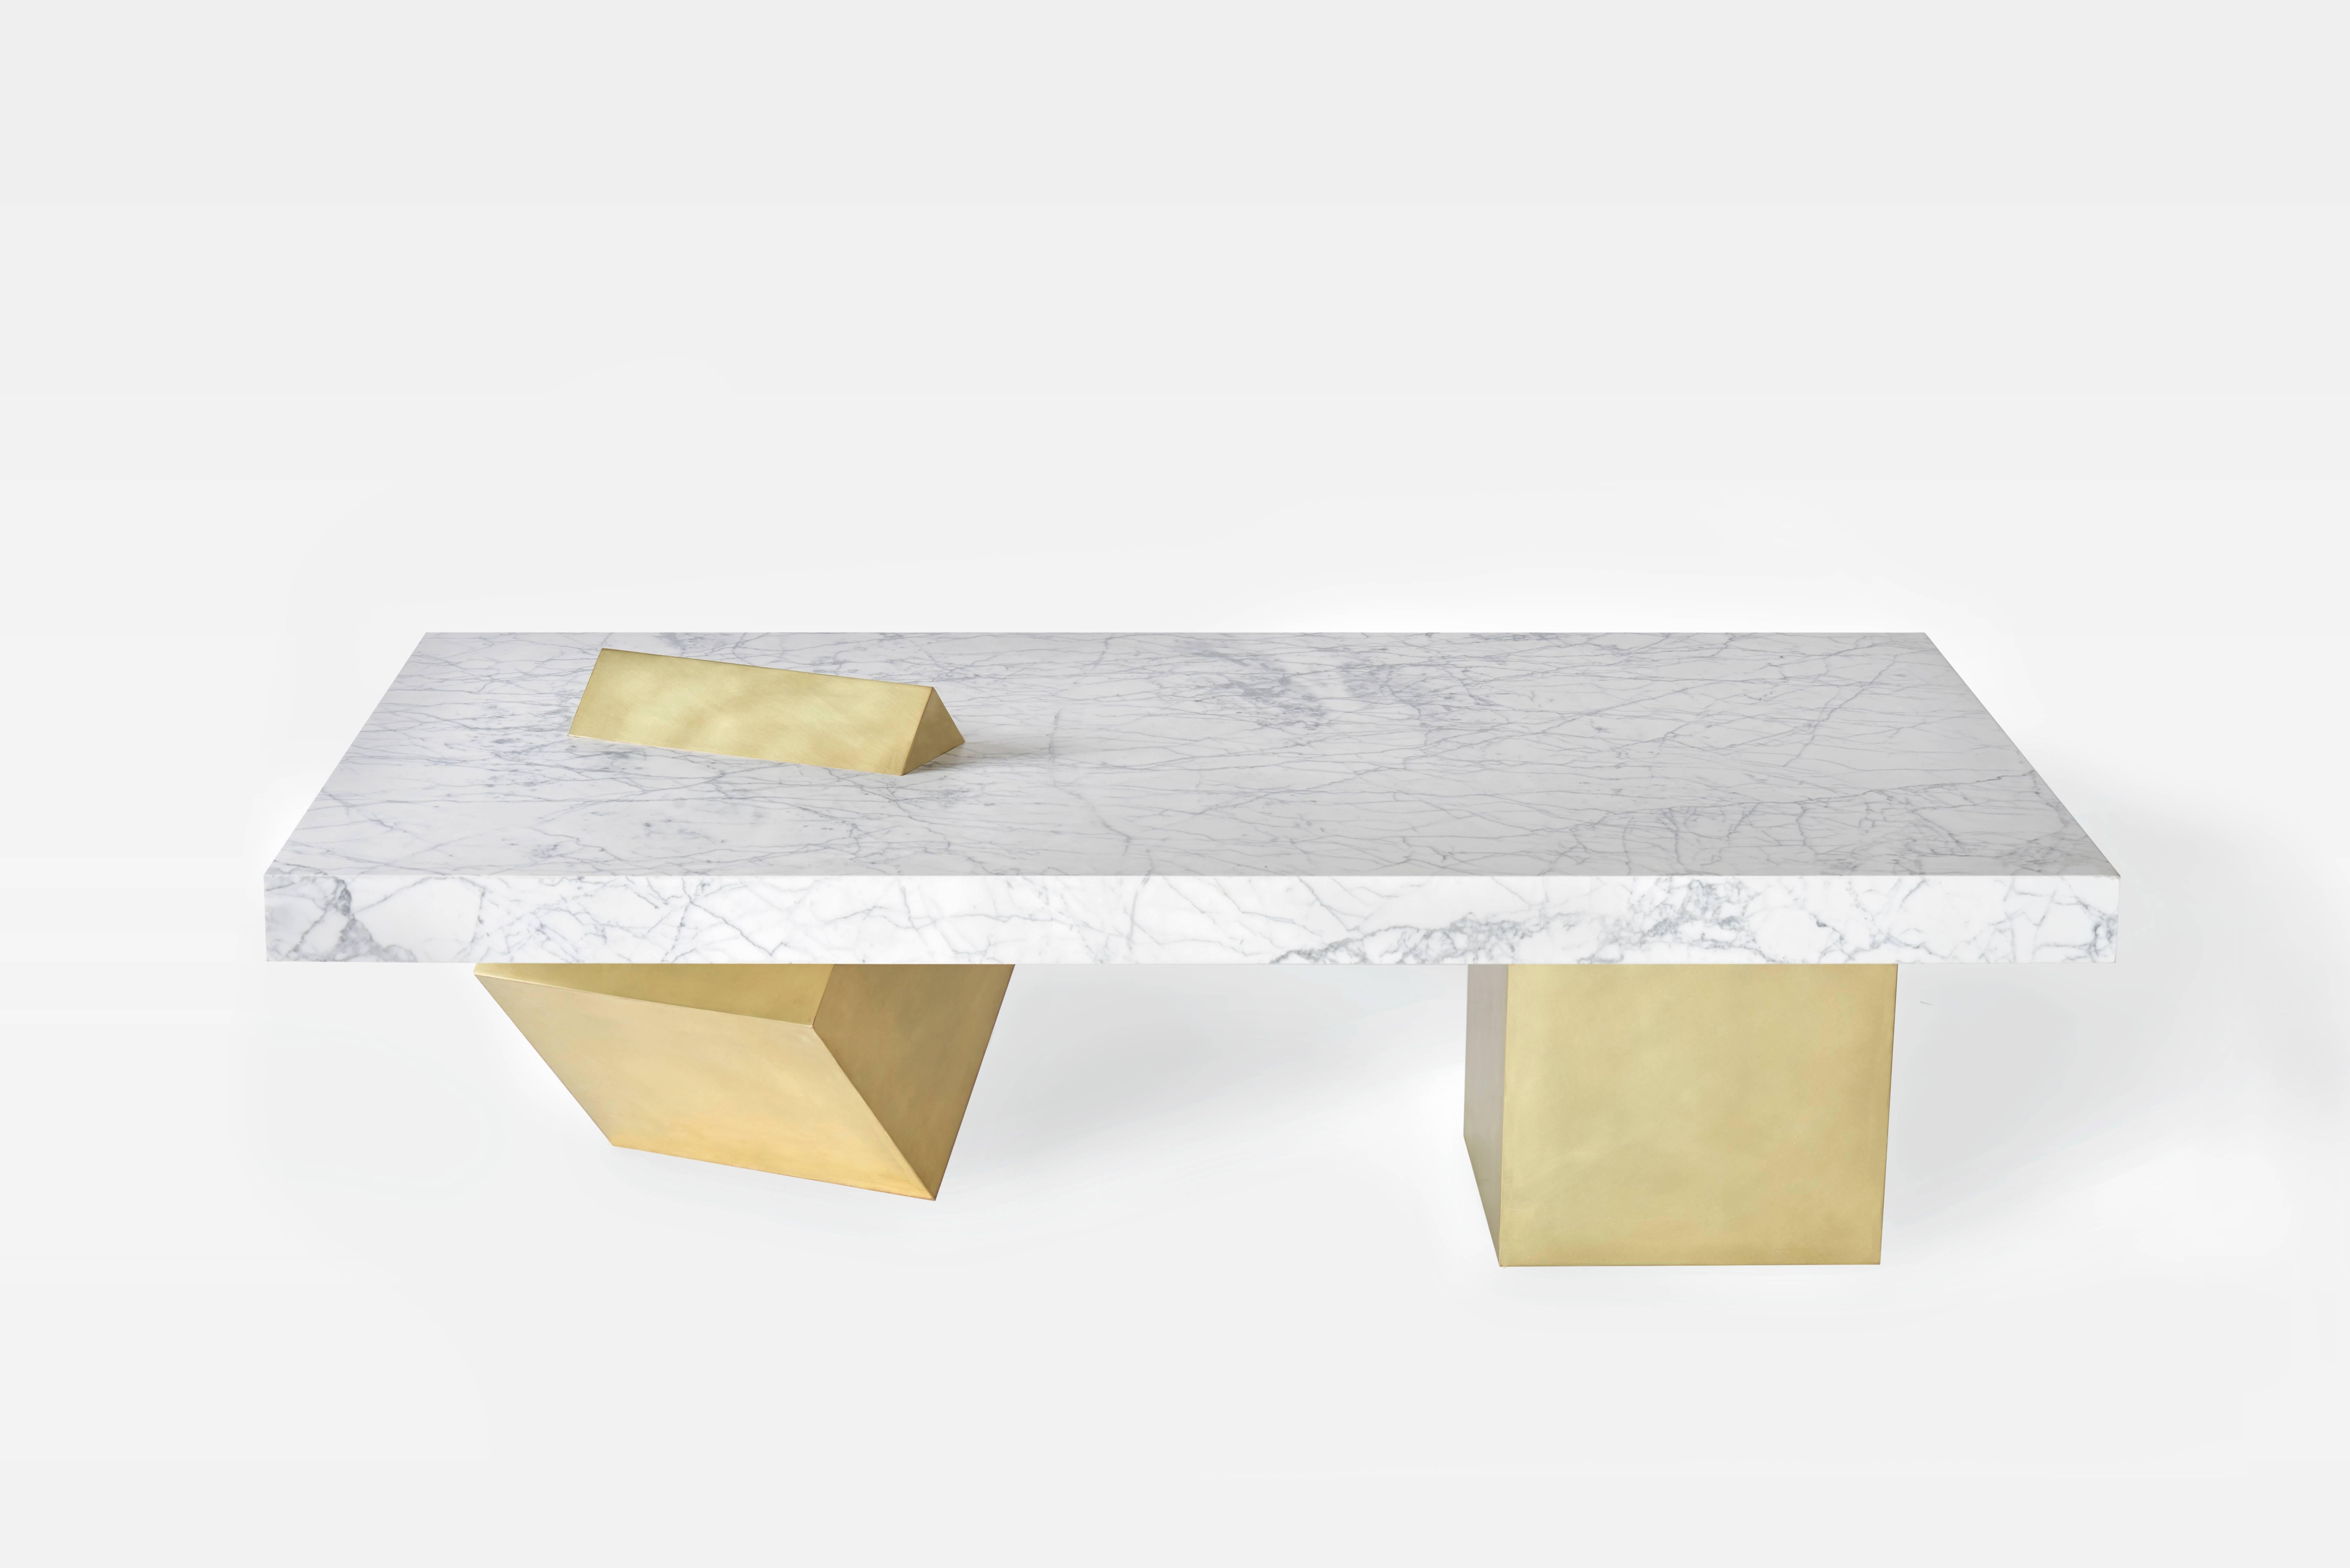 Italian White Venato marble surface, honed brushed brass cube bases

Dimensions: 20” H x 35.5” W x 60” L.